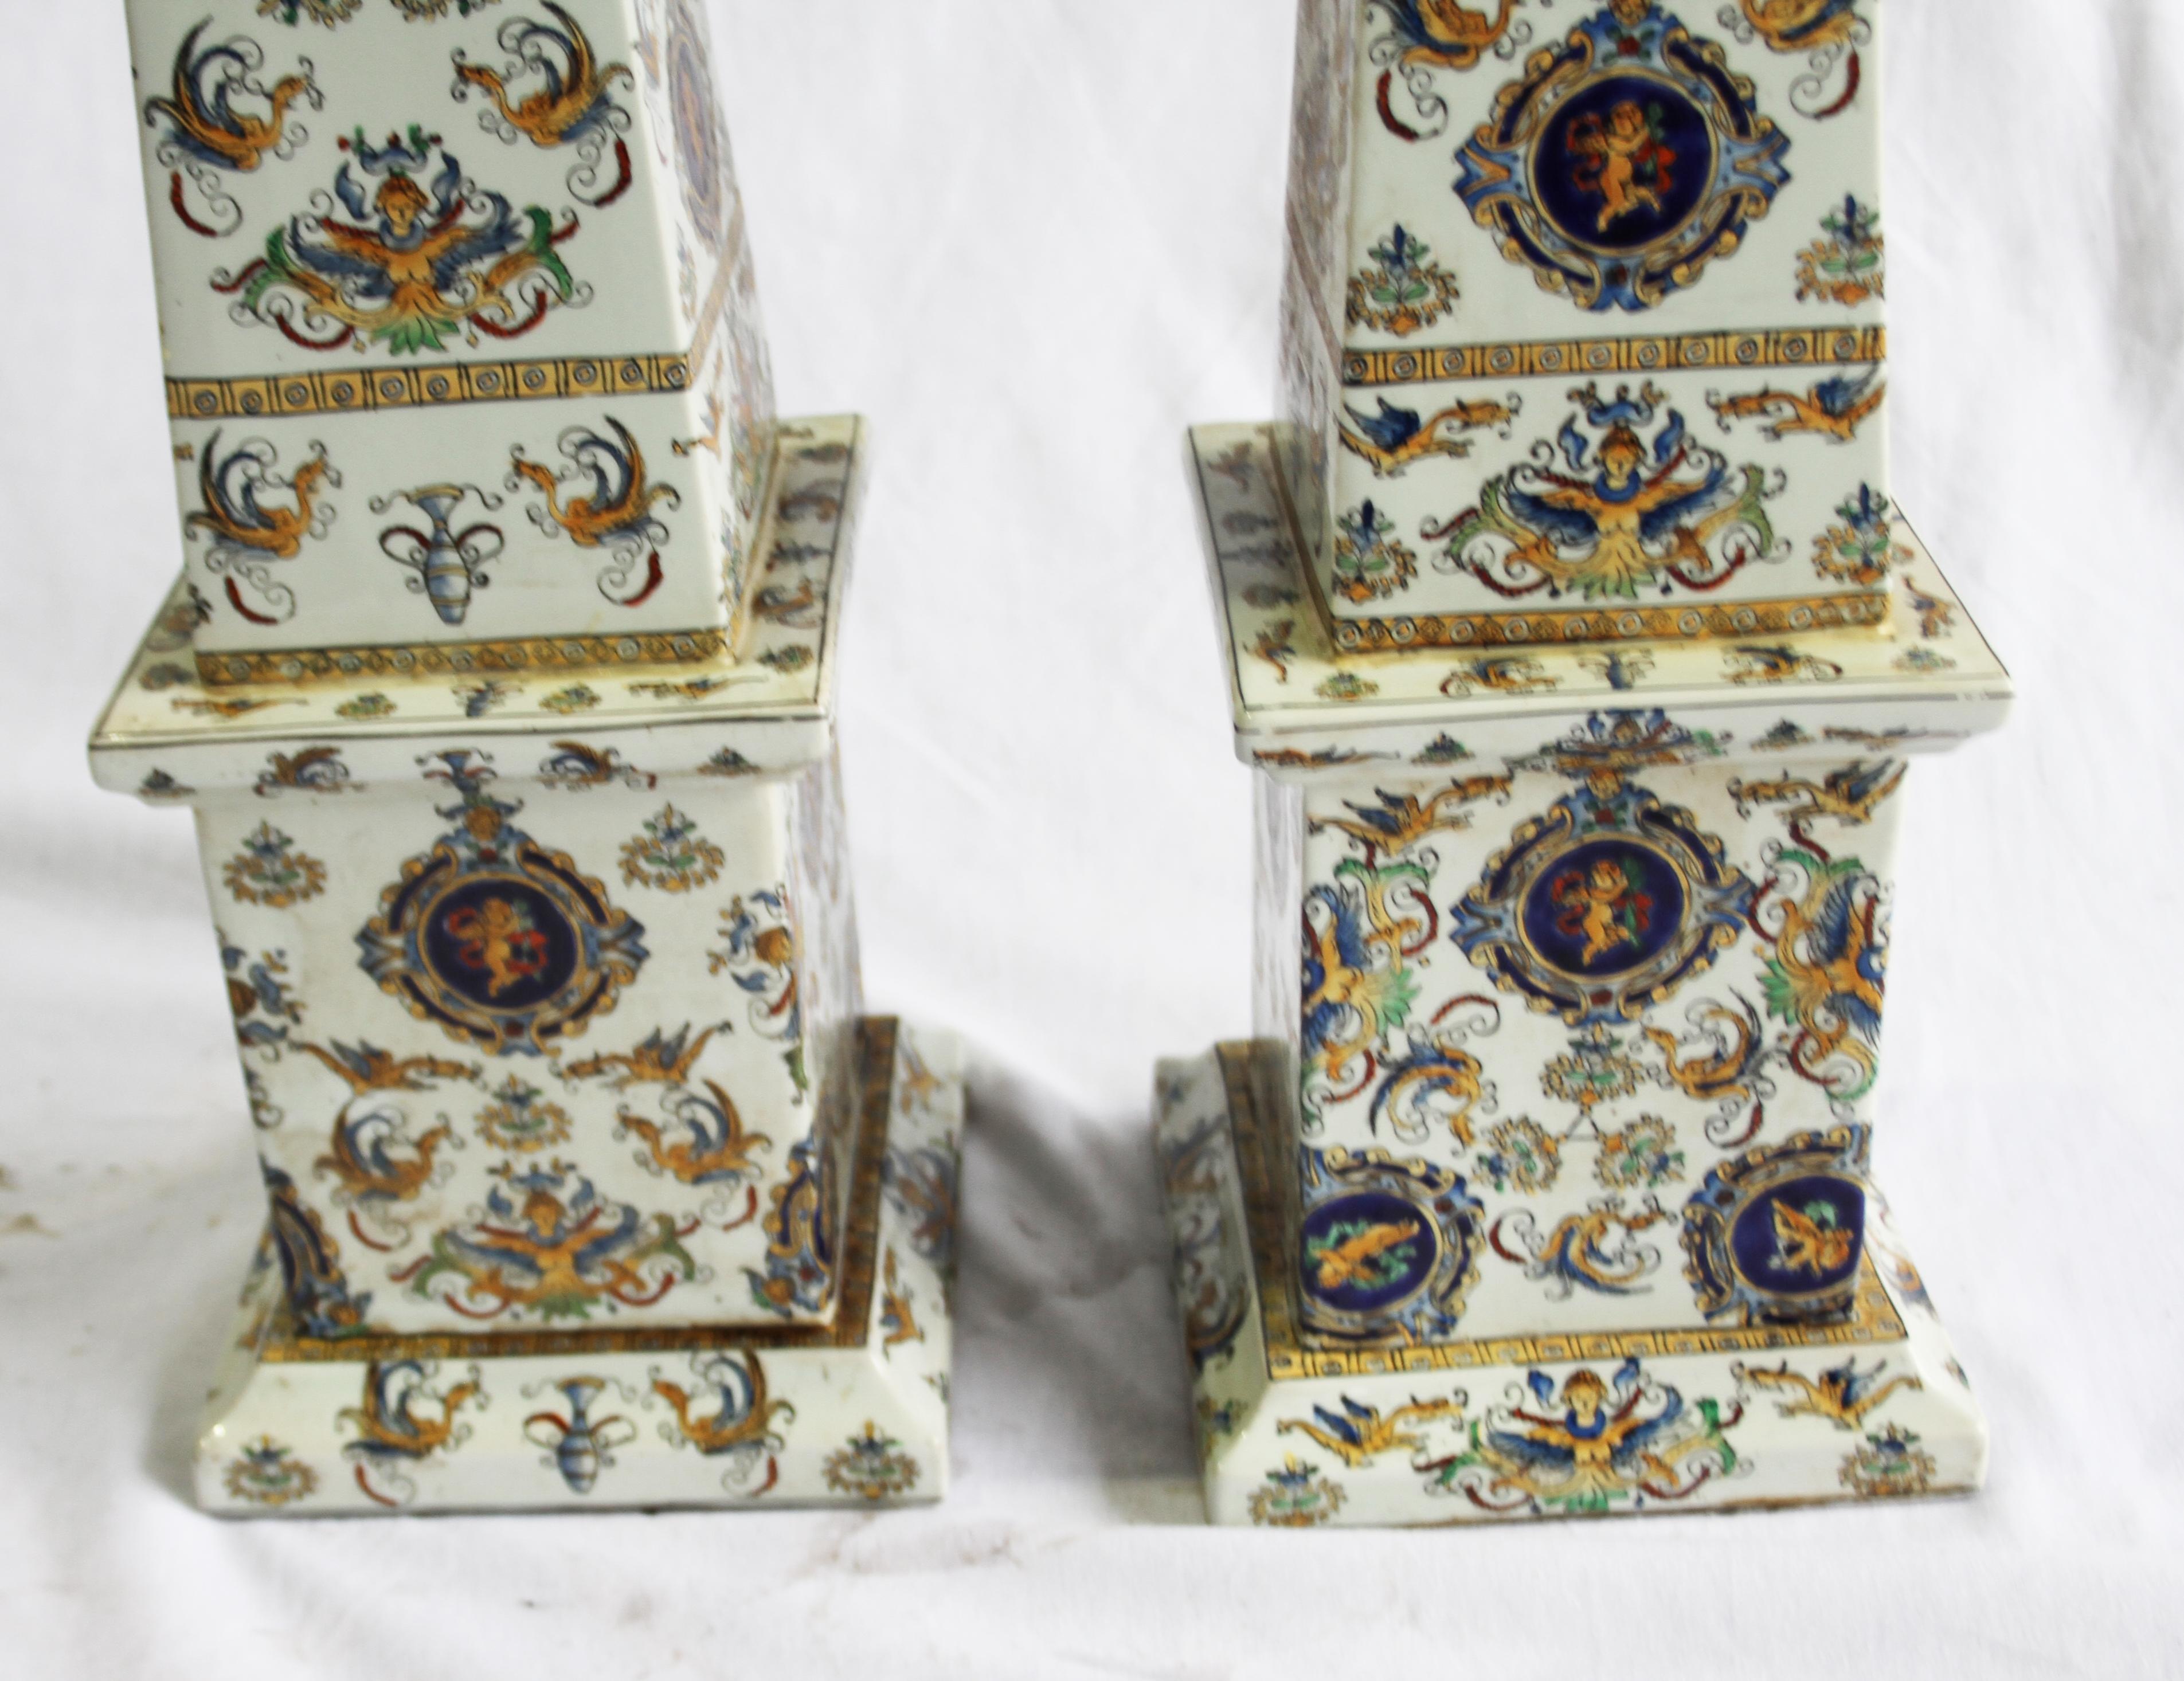 Pair of highly decorative, hand painted porcelain obelisks. 

Wonderful vibrant color decoration with cherubs on plaques.